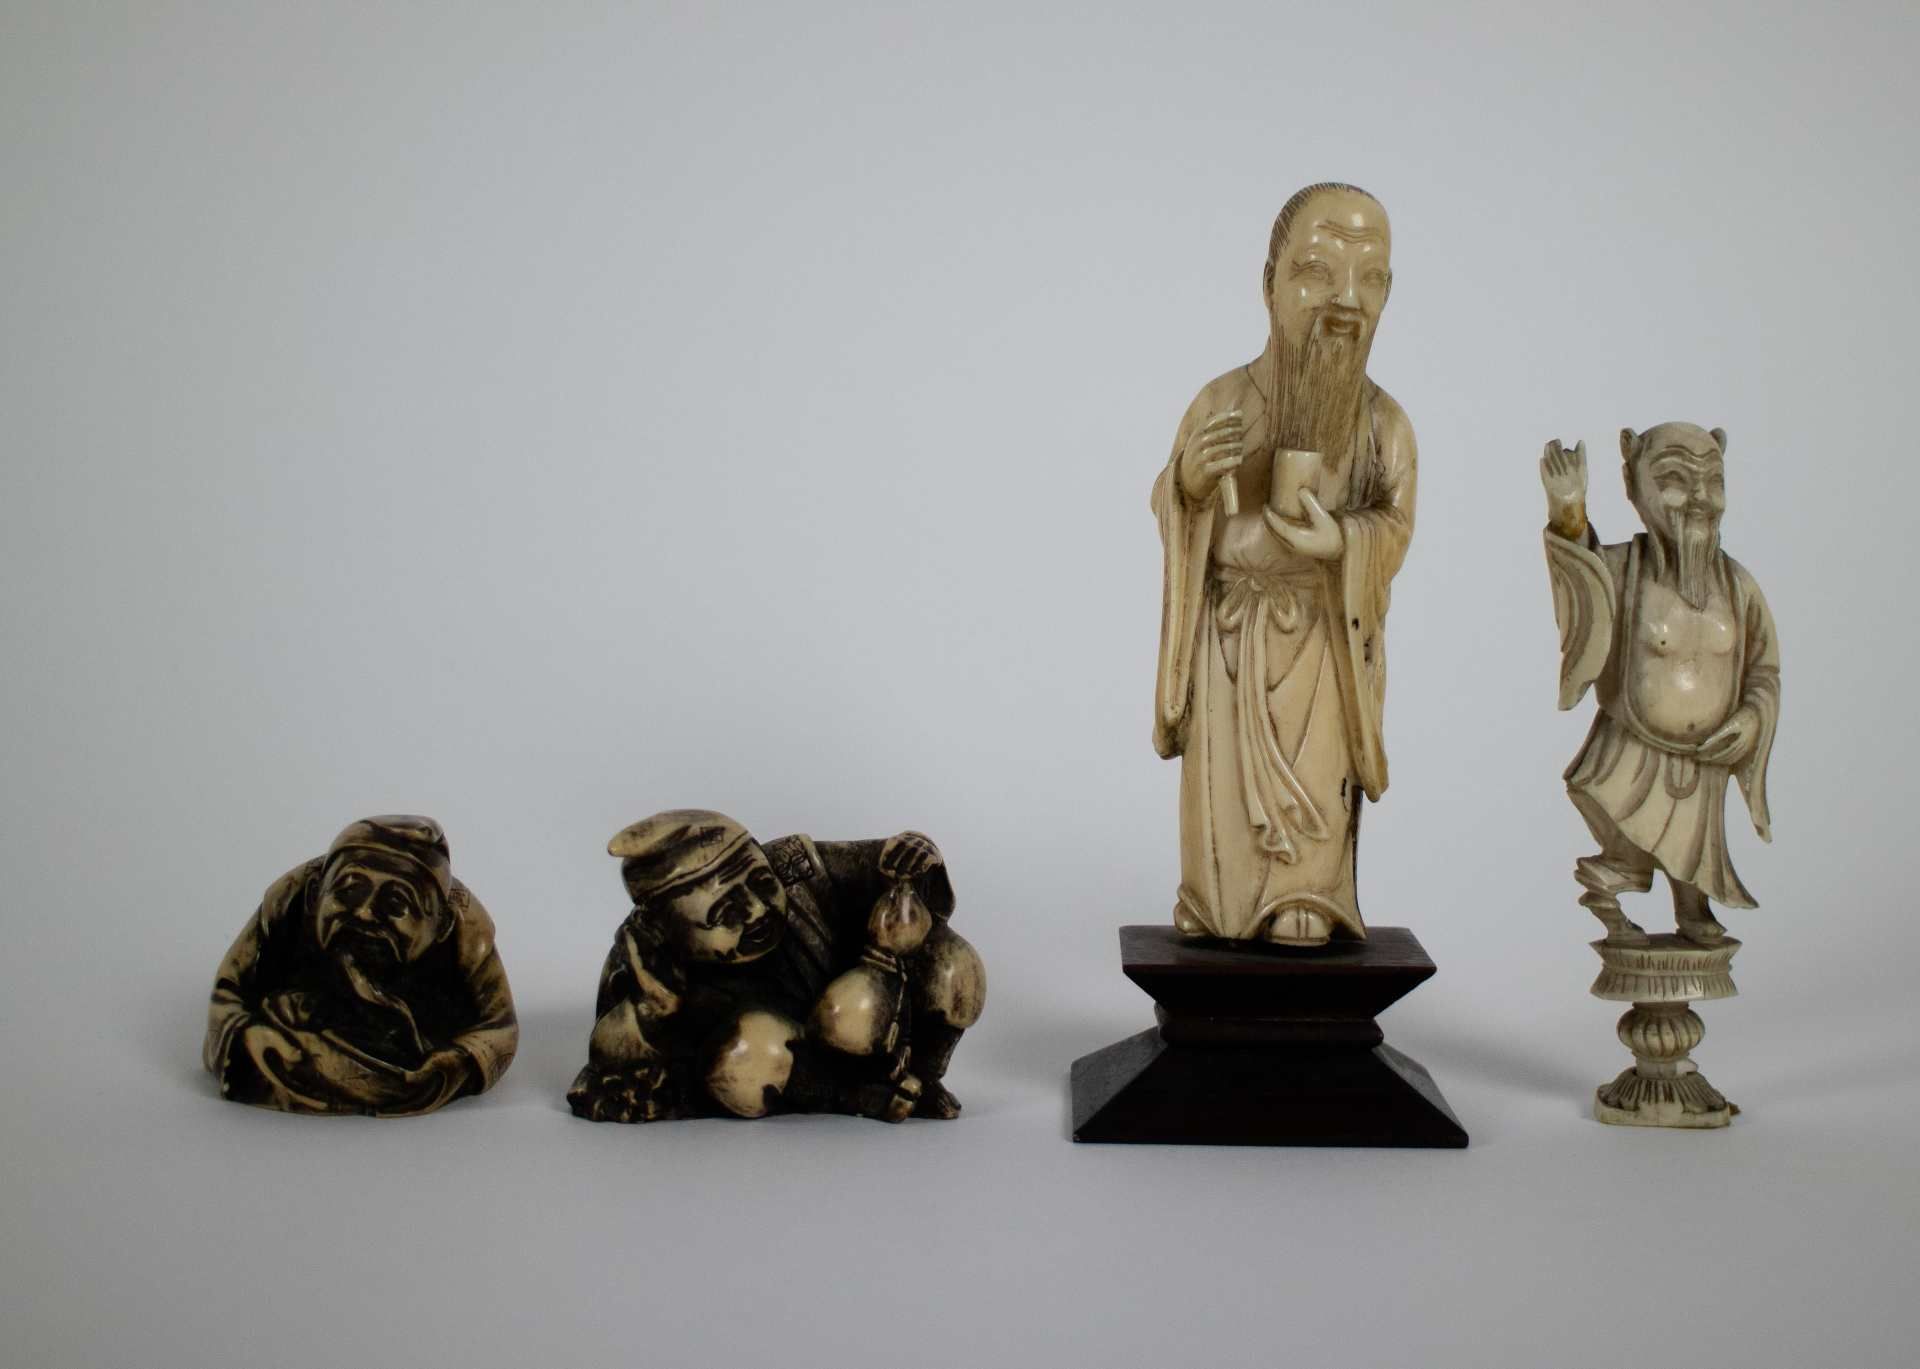 Lot with 4 Japanese ivory figures